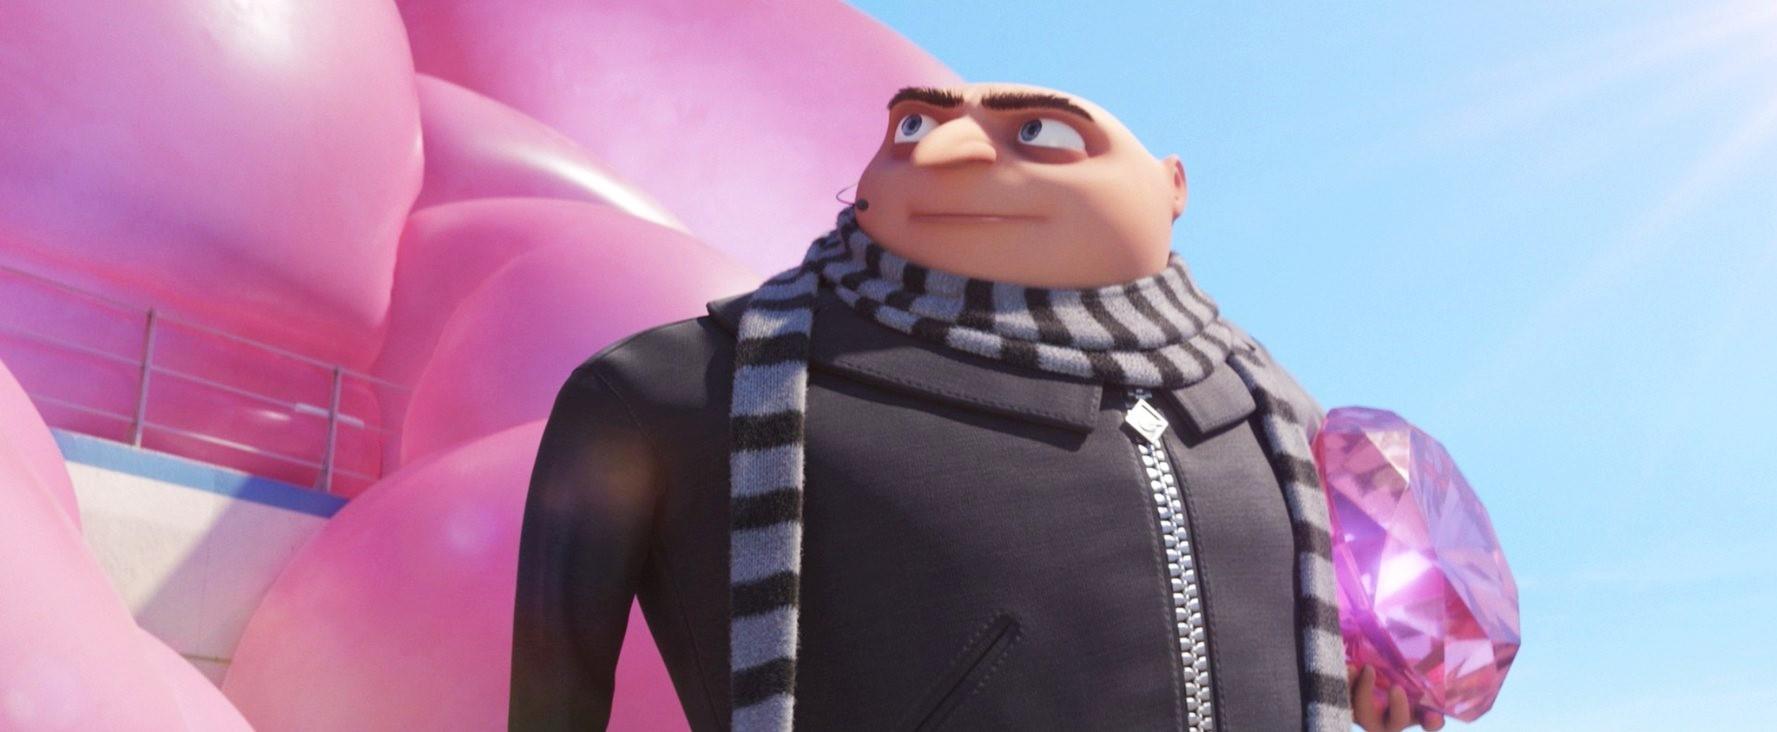 Gru from Universal Pictures' Despicable Me 3 (2017)